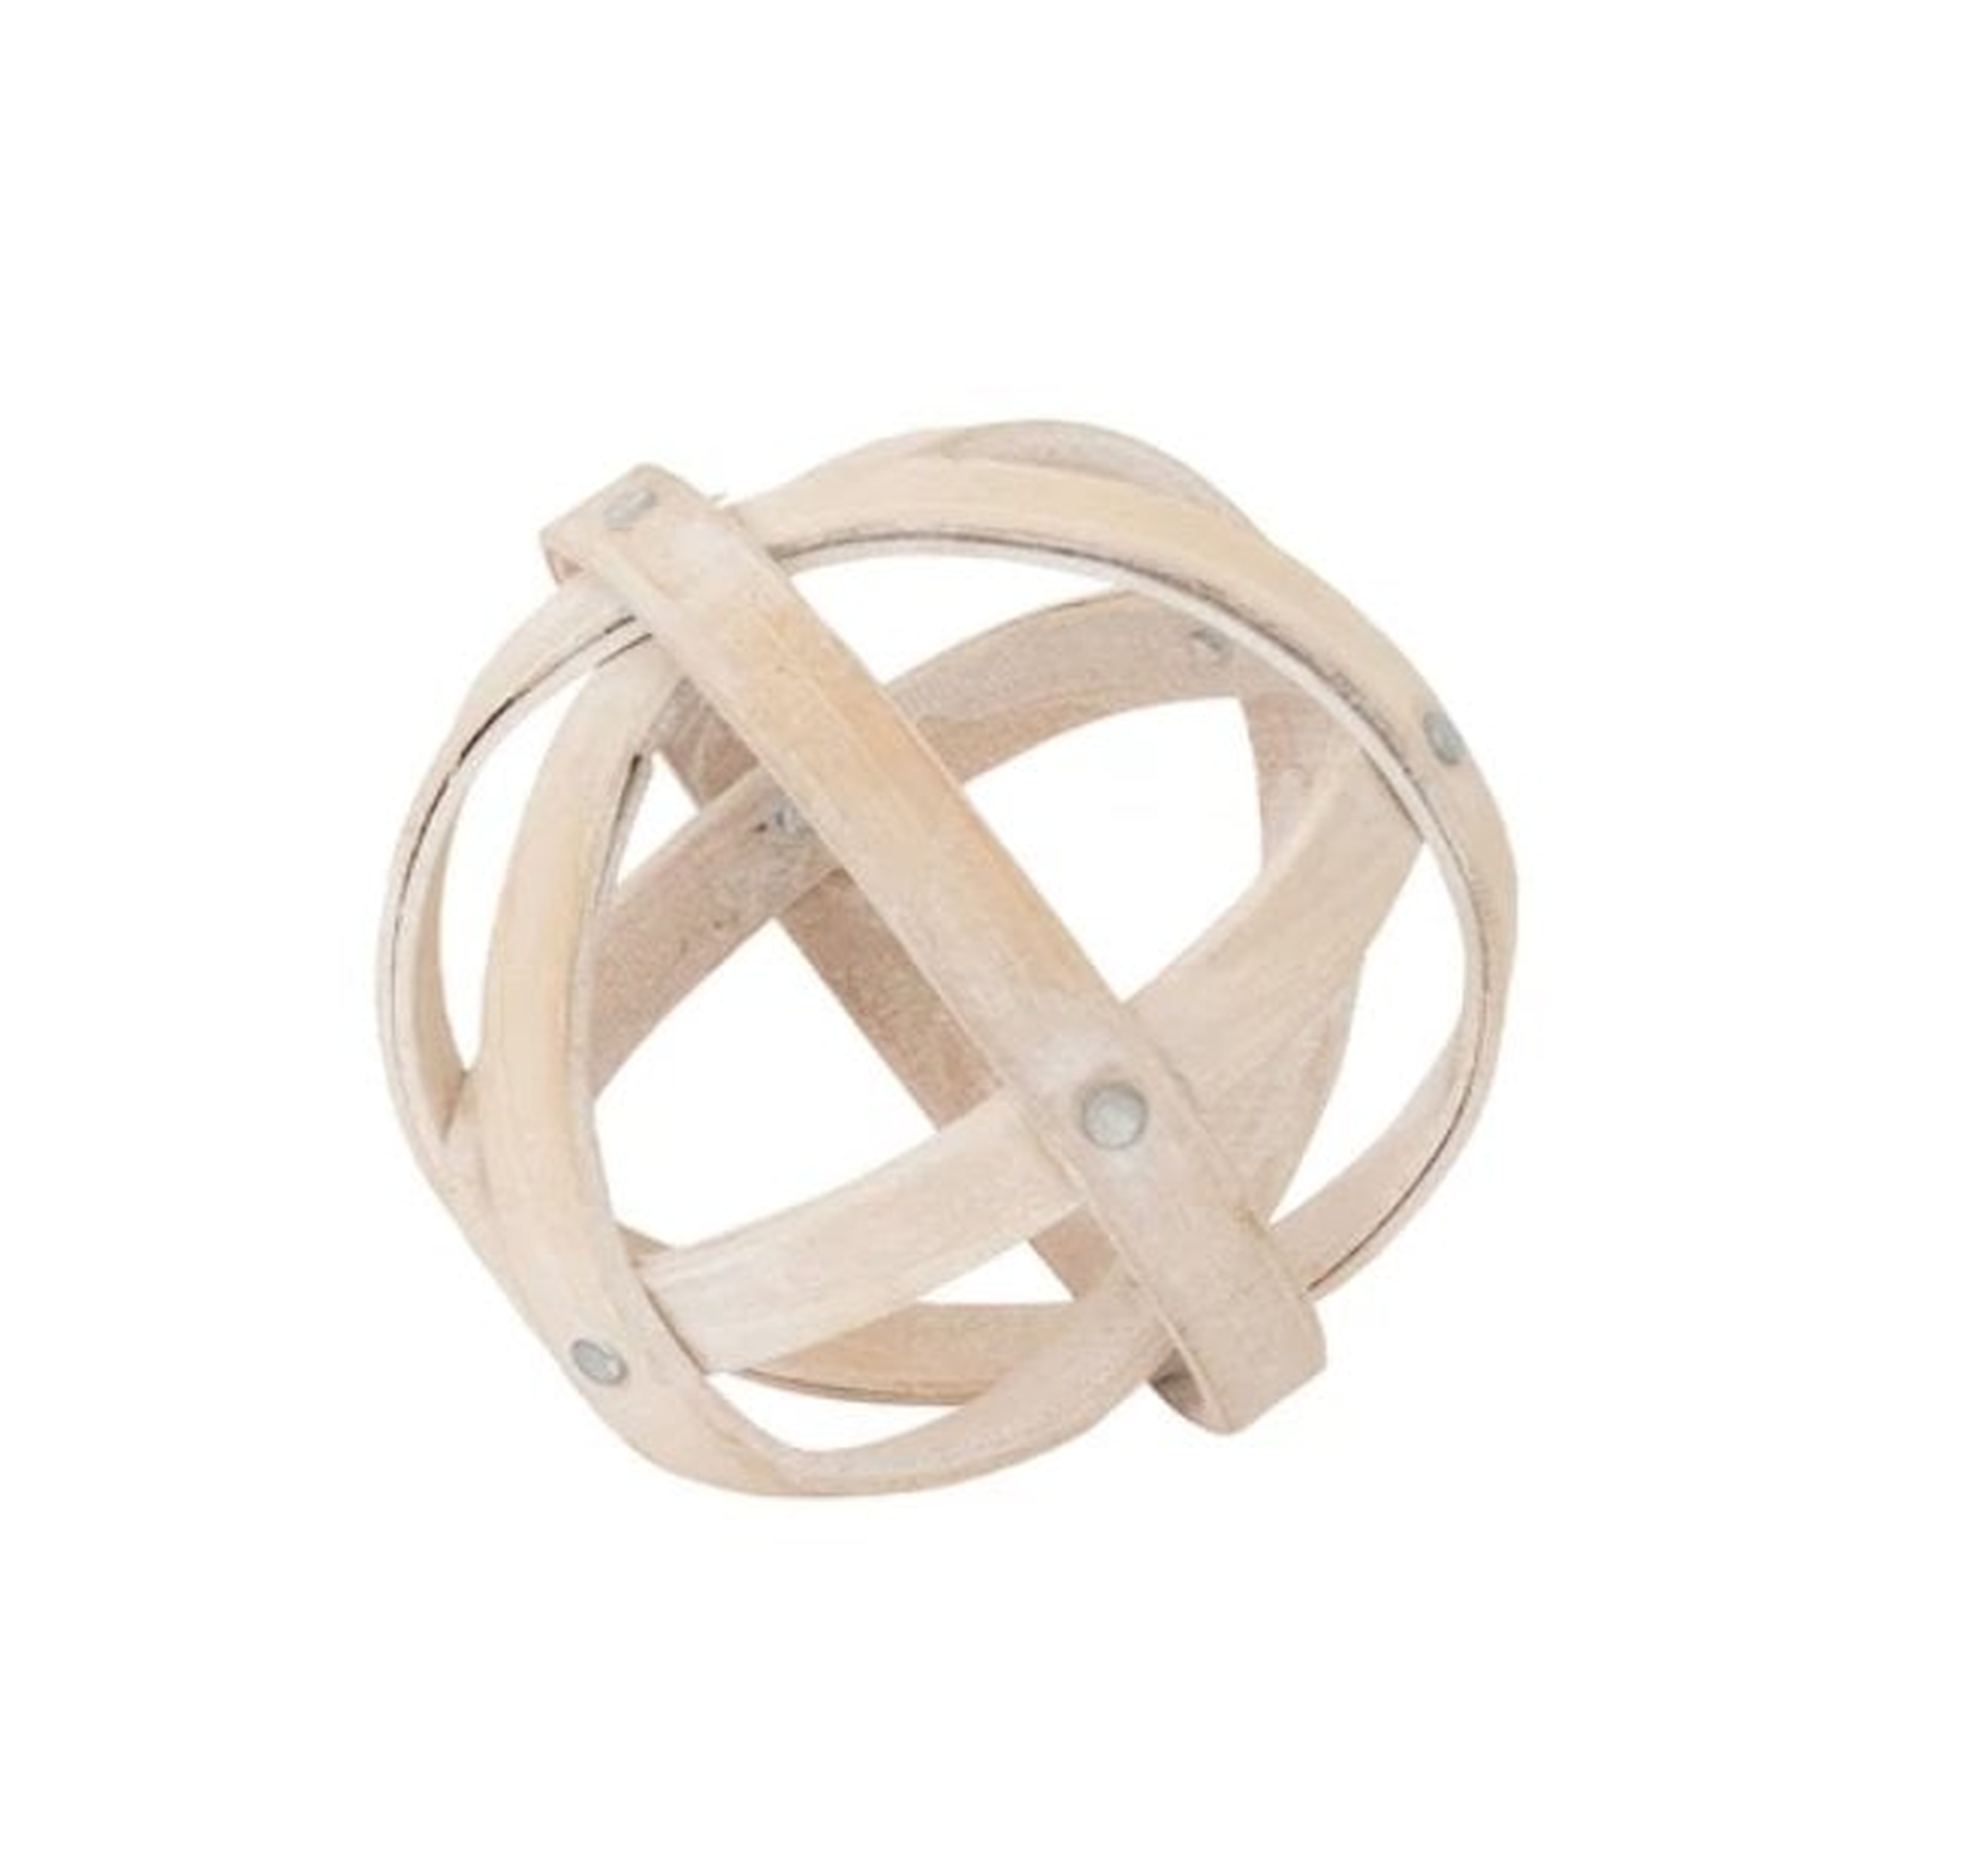 BAMBOO GEO OBJECT - McGee & Co.